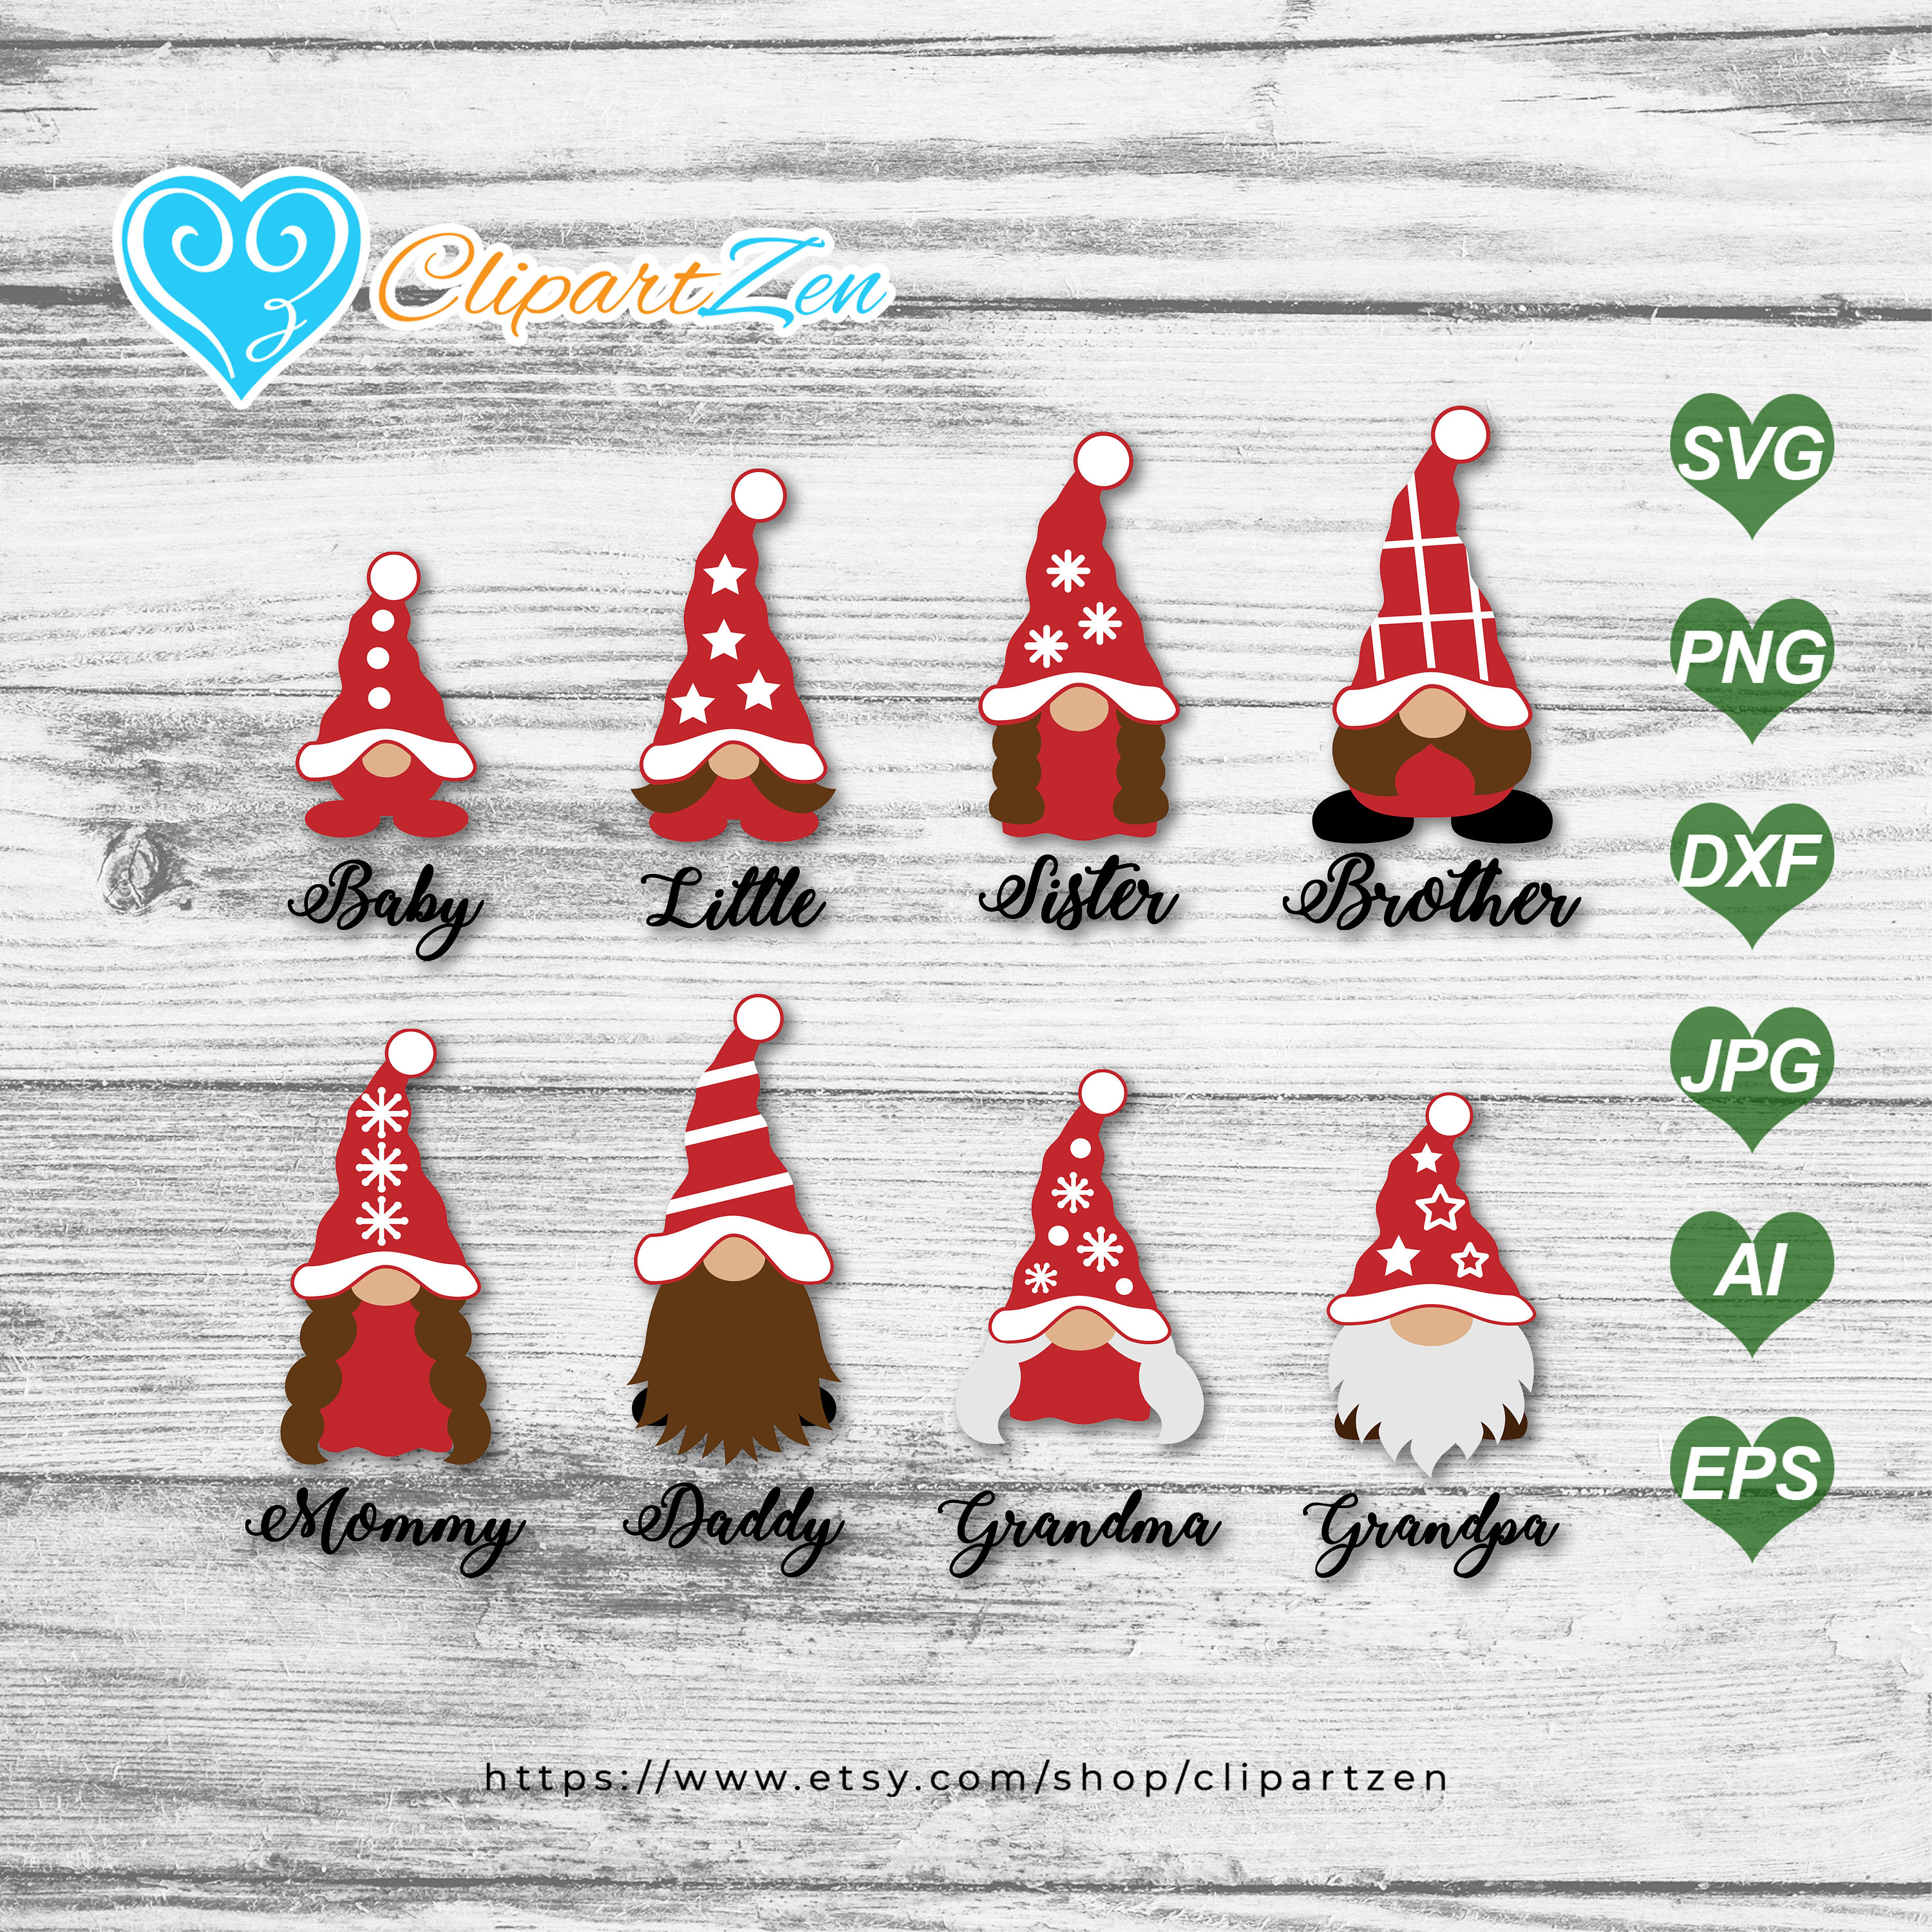 Download Family Christmas Gnome Svg Png Dxf Jpg Eps Ai Clipart Etsy